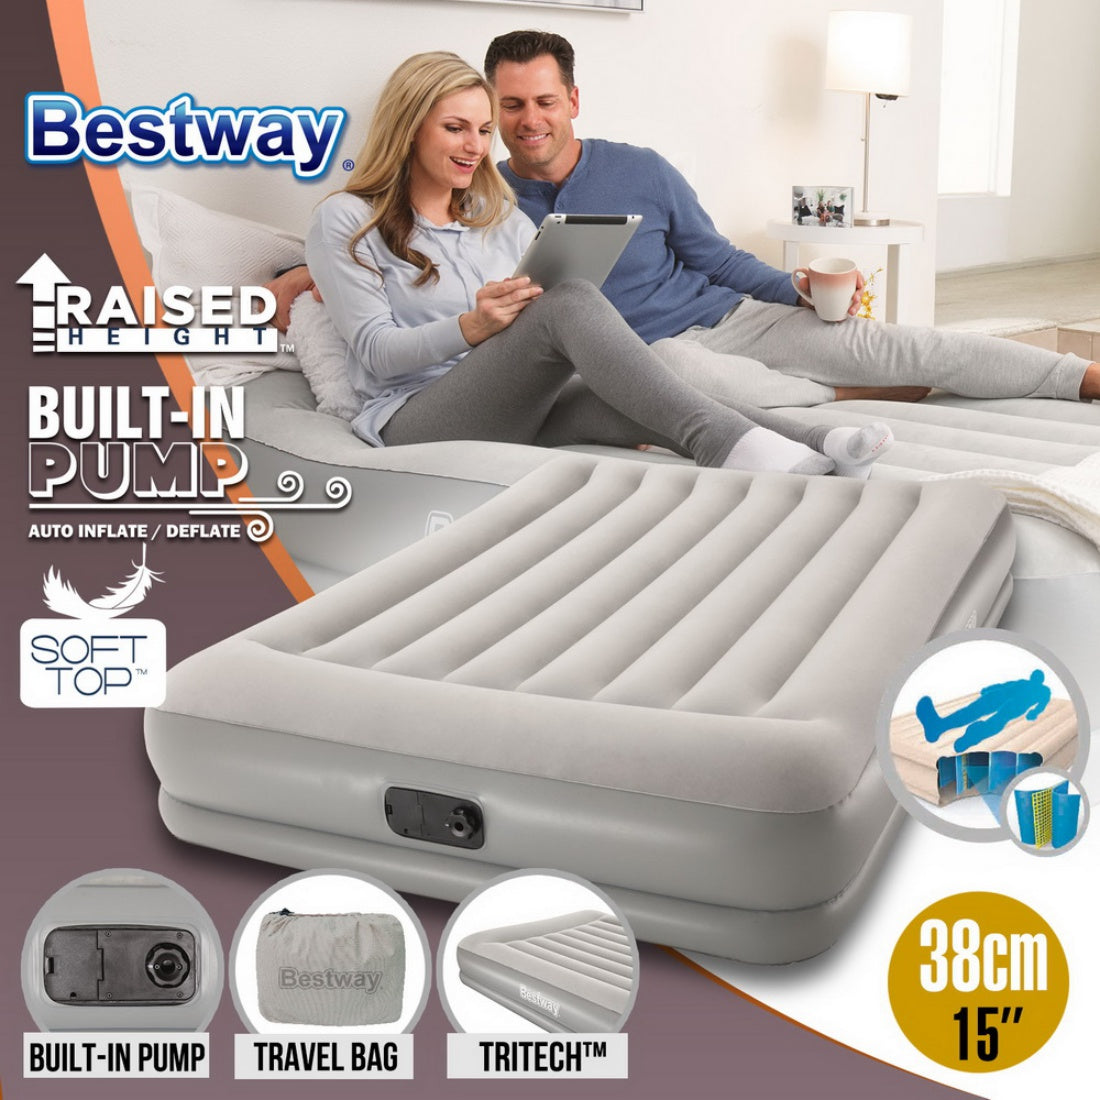 Bestway Portable Queen Inflatable Air Bed Blow Up Mattress Built In Pump Travel